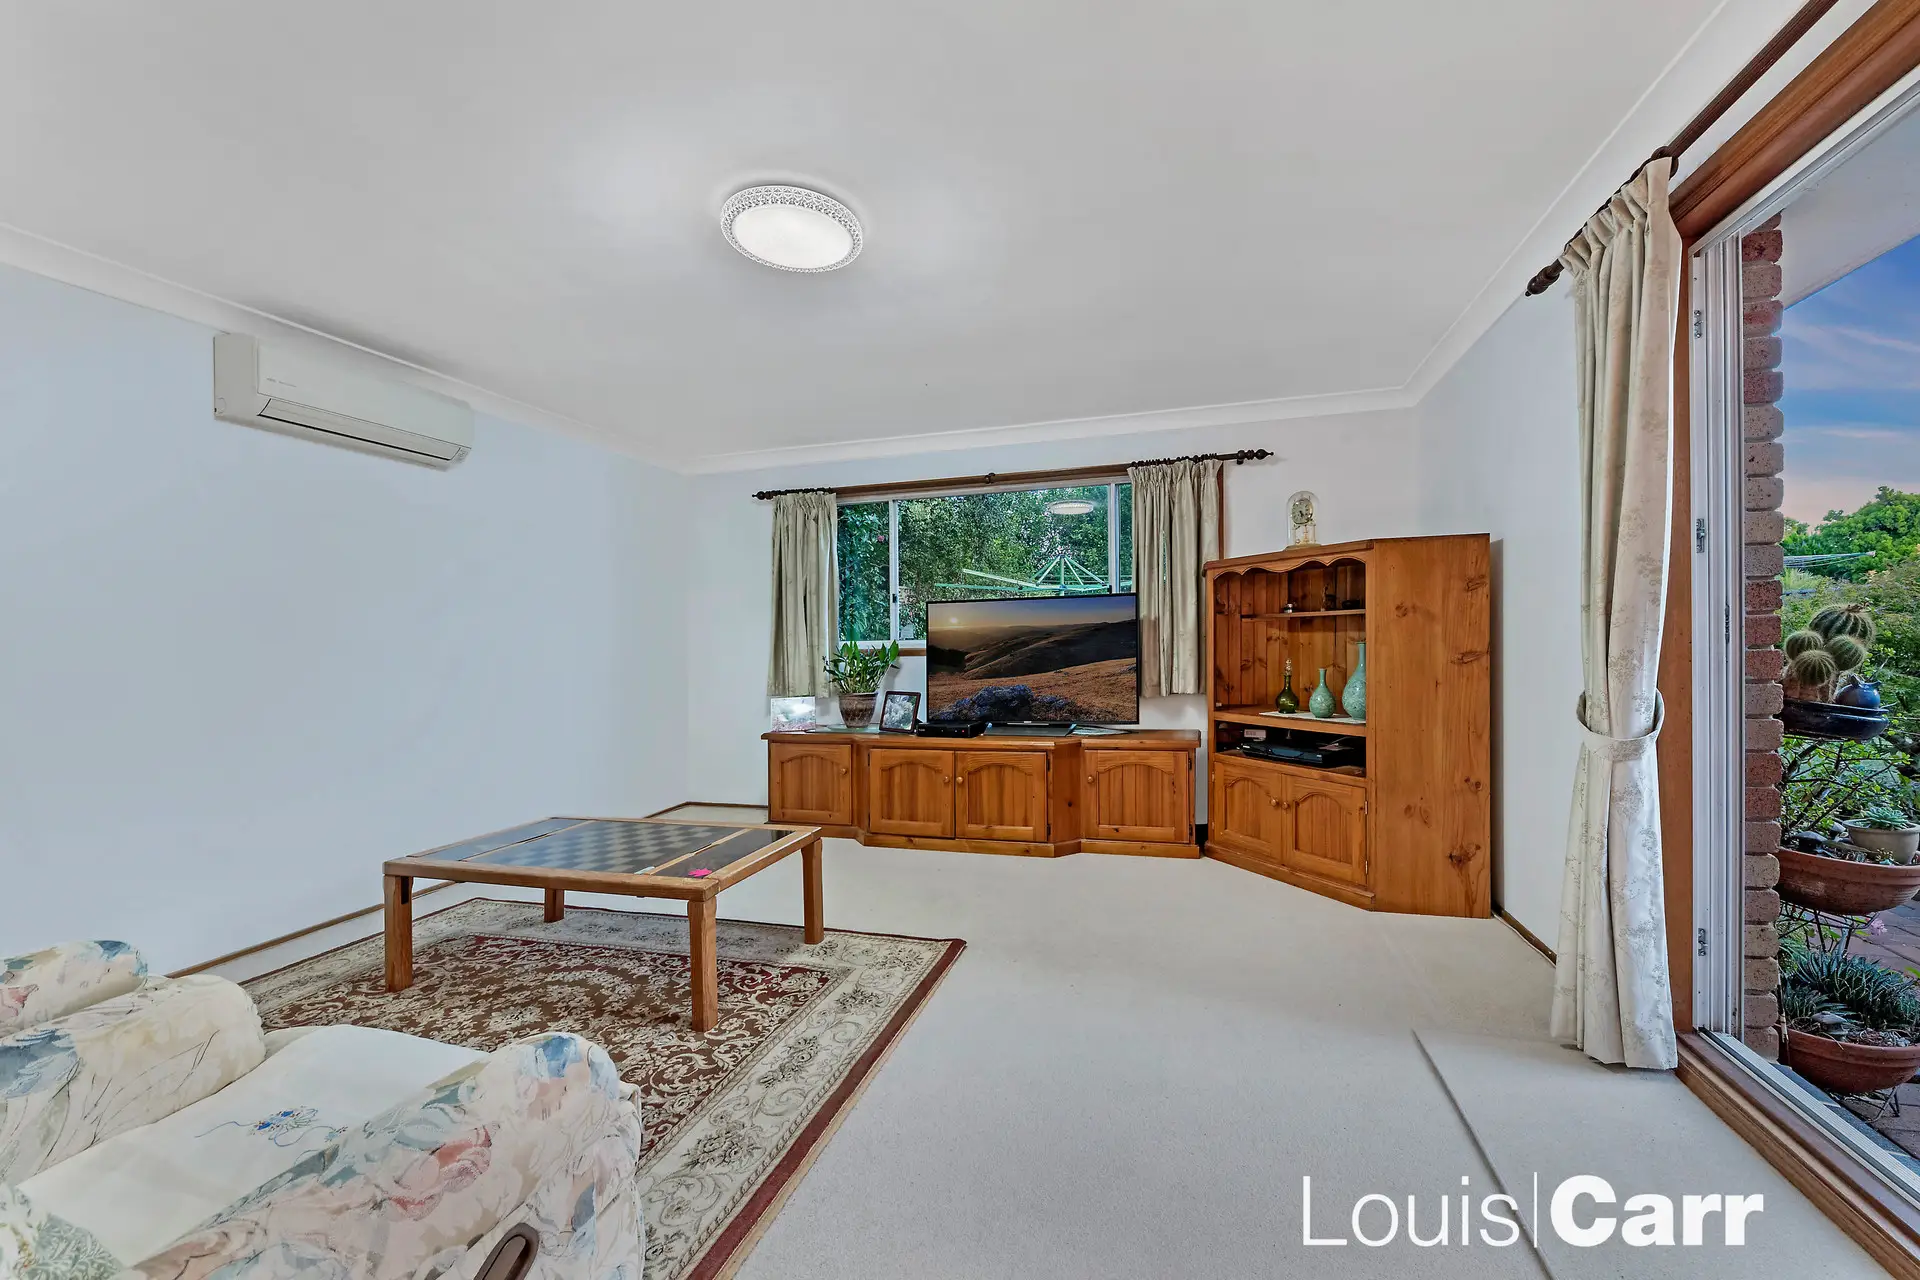 Photo #6: 59 Cedarwood Drive, Cherrybrook - Sold by Louis Carr Real Estate